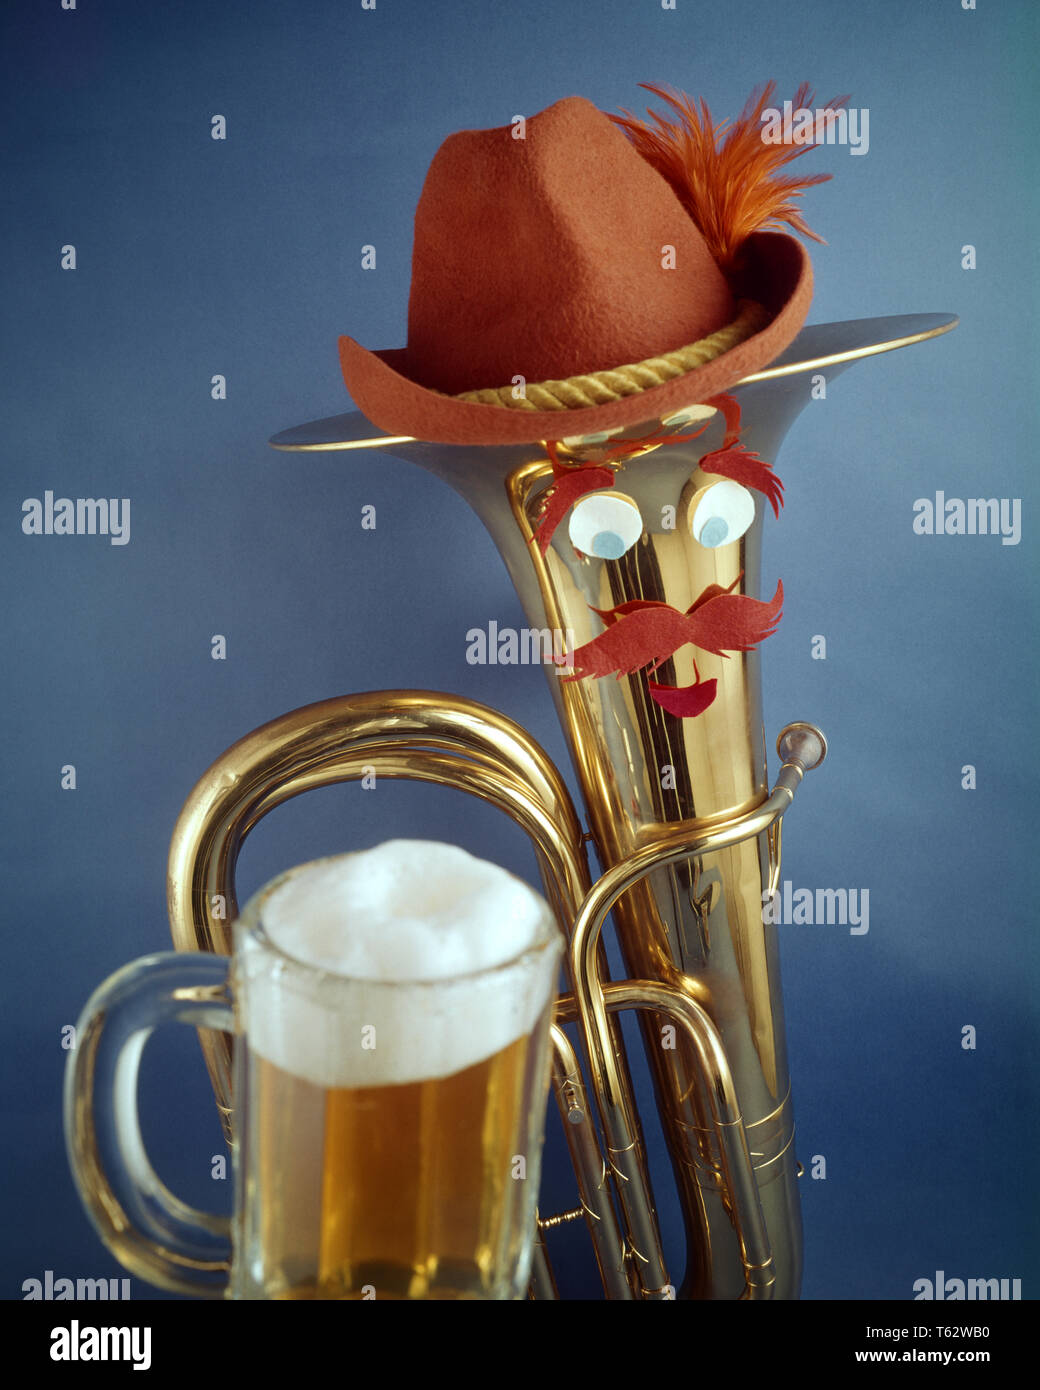 1970s HUMOROUS OKTOBERFEST STILL LIFE BRASS BARITONE HORN WITH BUG-EYED FACE MUSTACHE WEARING BAVARIAN HAT AND GLASS OF BEER   - kf20797 PHT001 HARS CELEBRATION STUDIO SHOT PERSONS FESTIVAL MALES SYMBOLS BRASS ENTERTAINMENT BIZARRE MUSTACHE BUG-EYED HUMOROUS HAPPINESS WEIRD HEAD AND SHOULDERS BEVERAGE AND EXCITEMENT RECREATION ZANY UNCONVENTIONAL OF CONCEPT ANTHROPOMORPHISM BAVARIAN CONCEPTUAL STILL LIFE STYLISH WACKY IDIOSYNCRATIC OKTOBERFEST SYMBOLIC AMUSING BARITONE CONCEPTS ECCENTRIC ERRATIC OLD FASHIONED OUTRAGEOUS REPRESENTATION Stock Photo